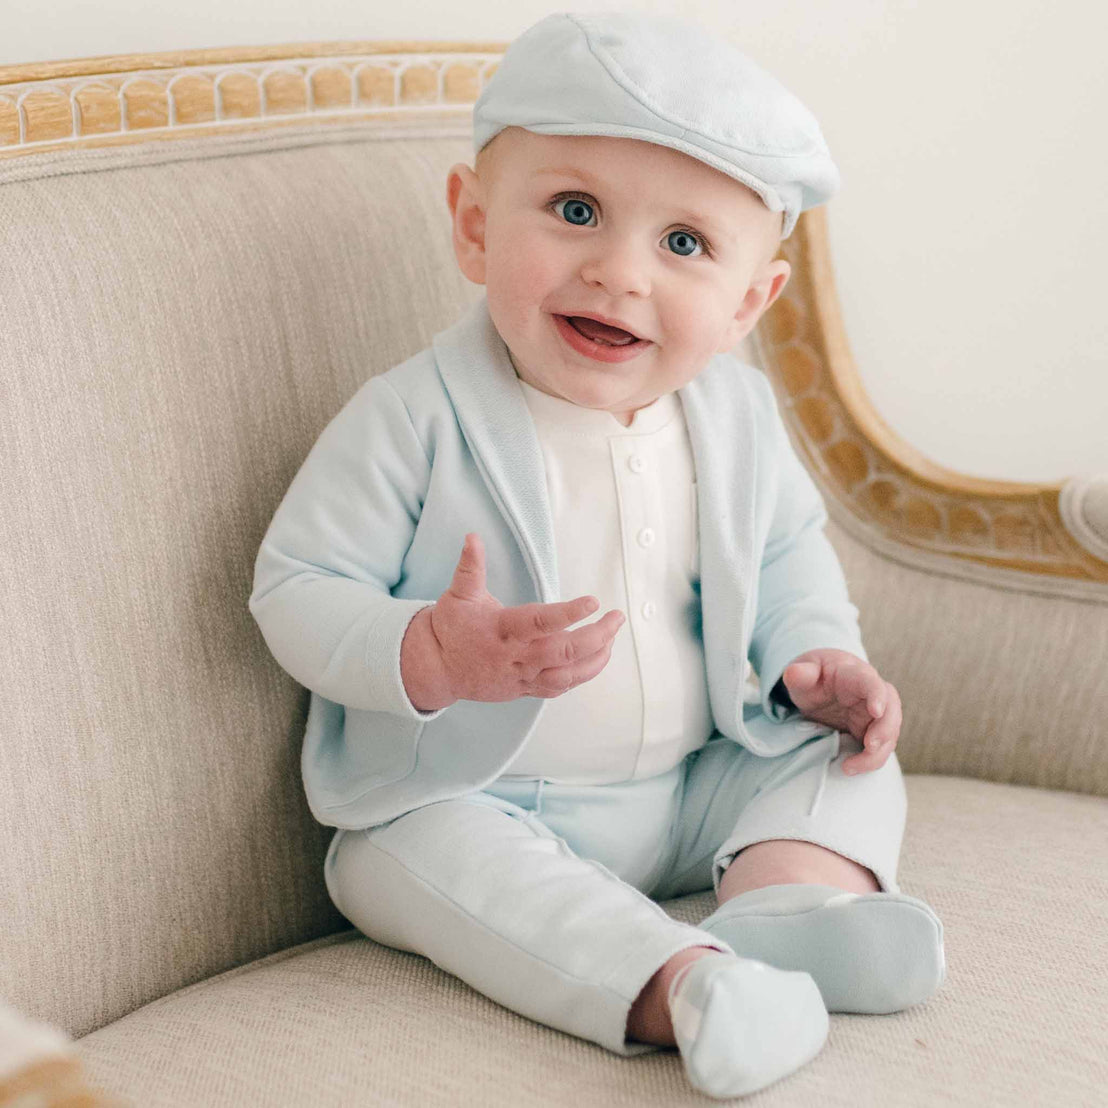 Sitting baby boy in robin's egg blue suit and newsboy cap